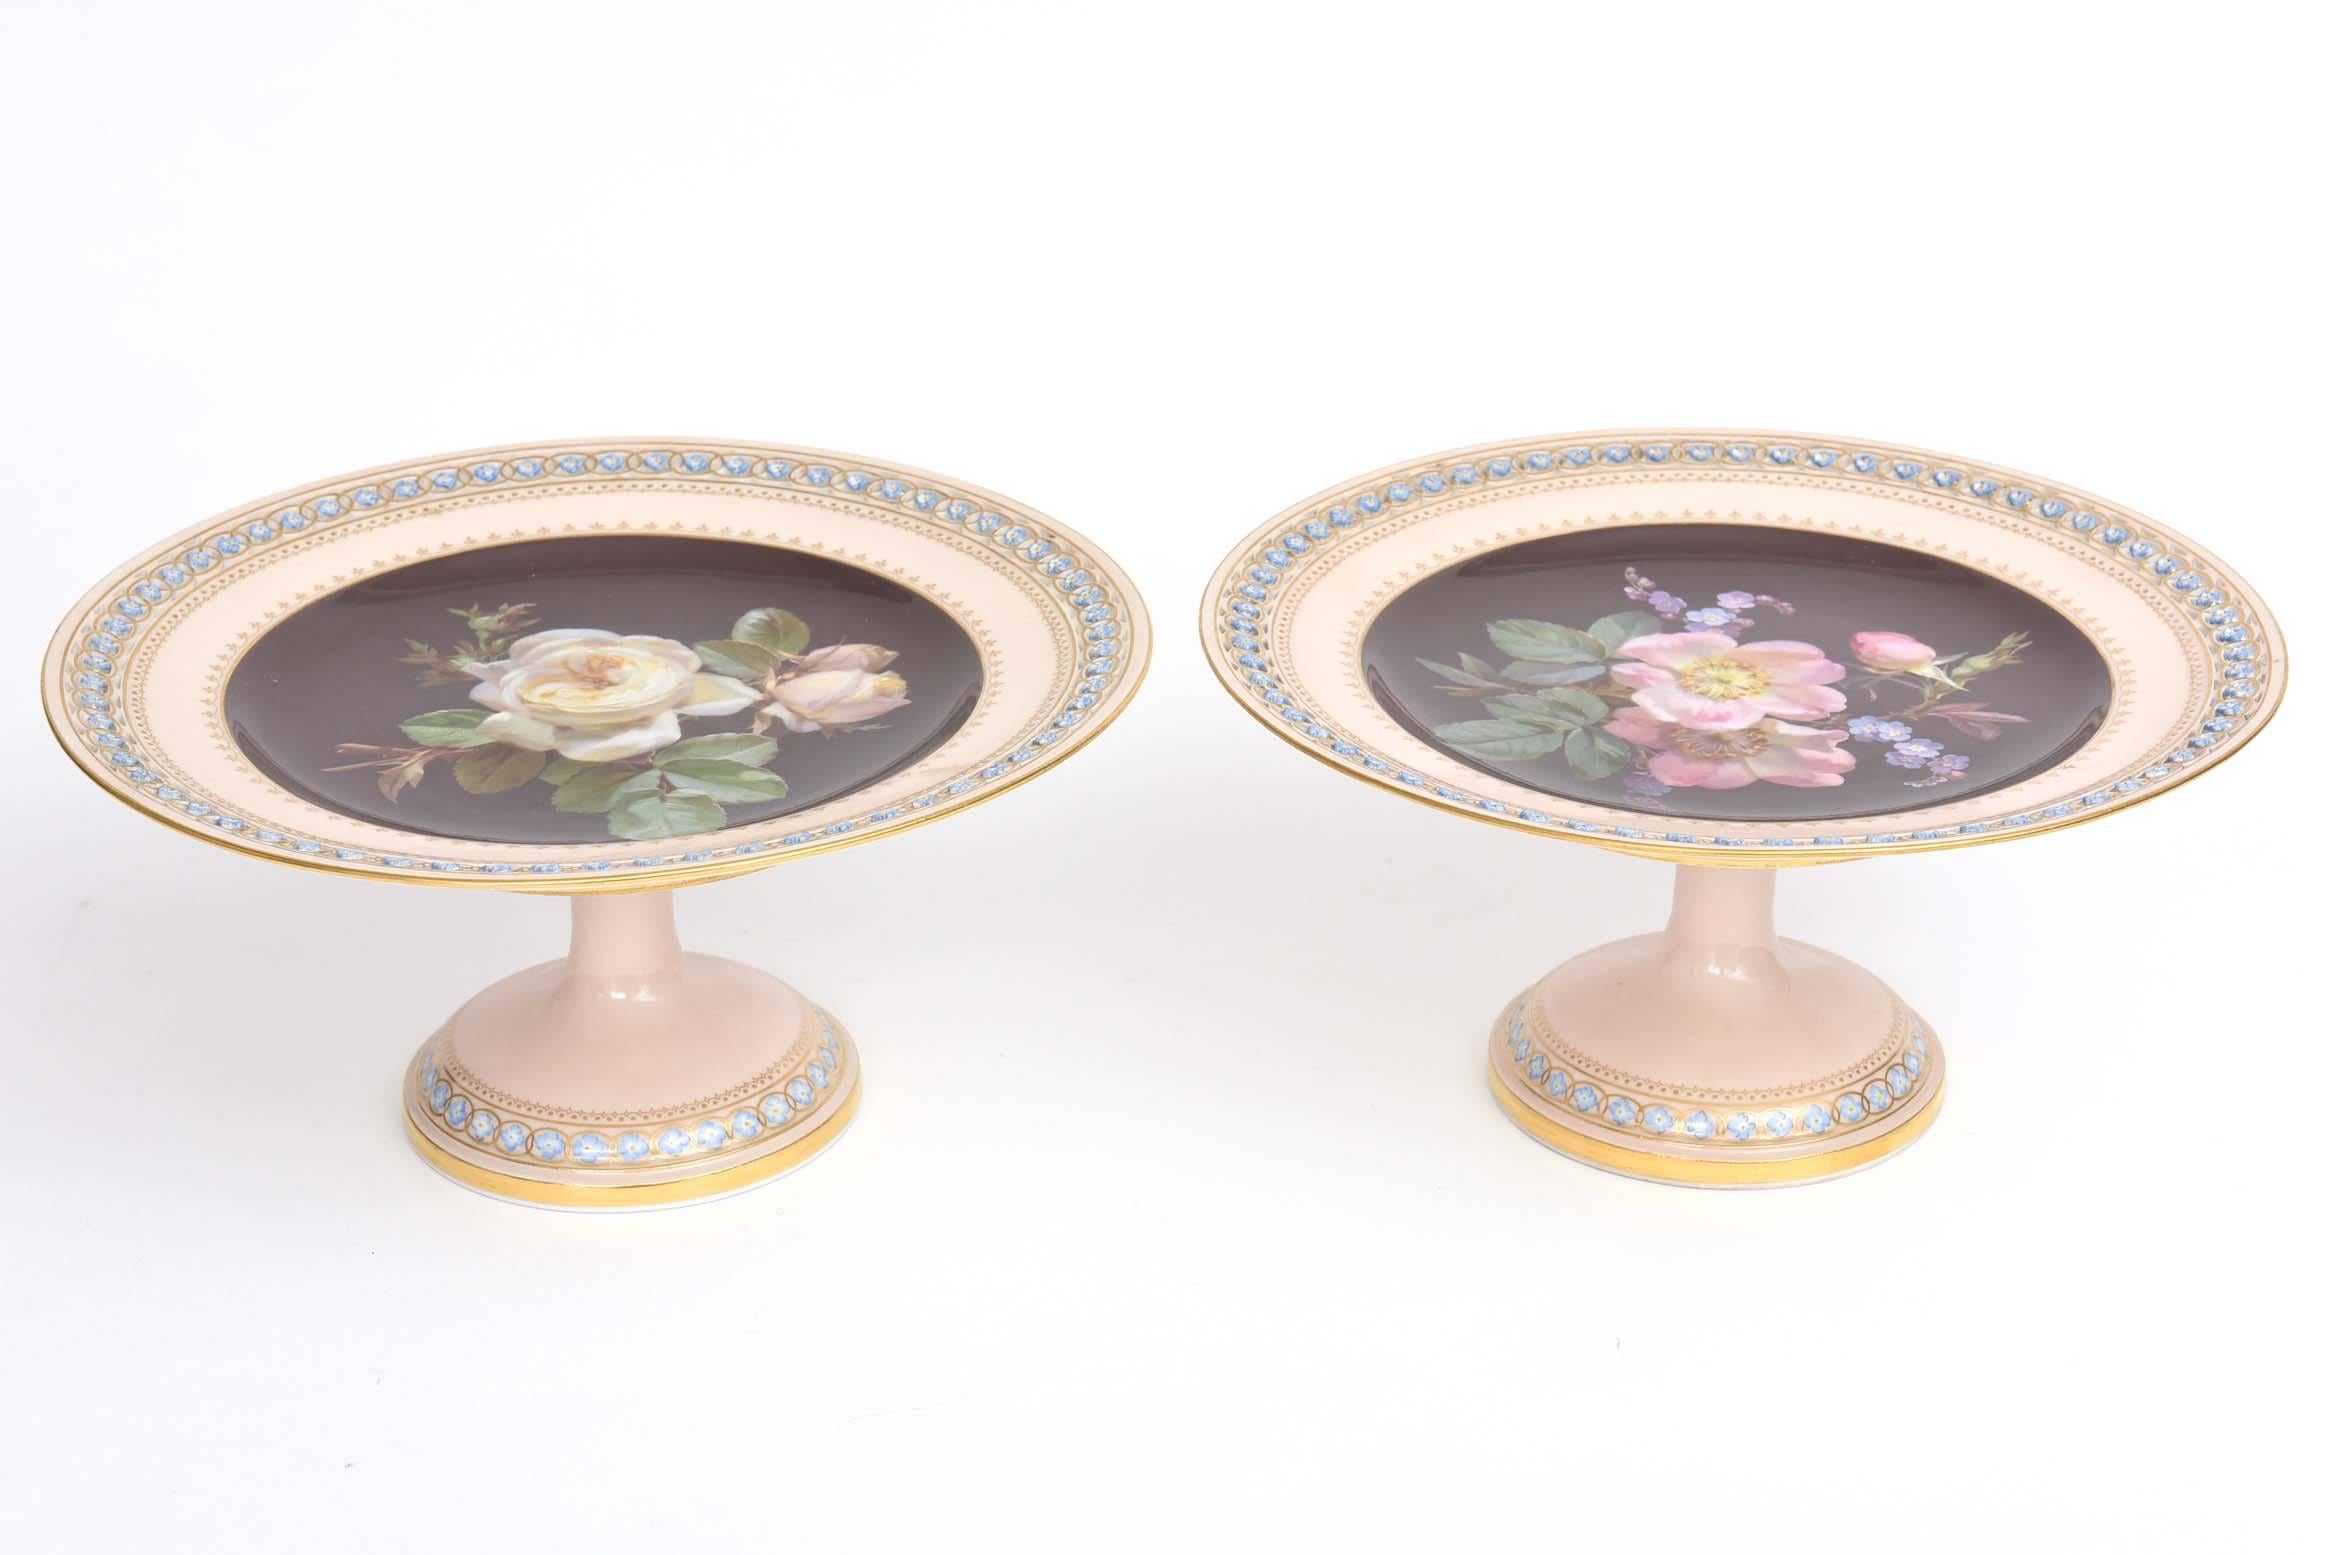 Rare Meissen Fine Porcelain Cabinet Pieces. Hand-Painted Botanicals, Reticulated 2